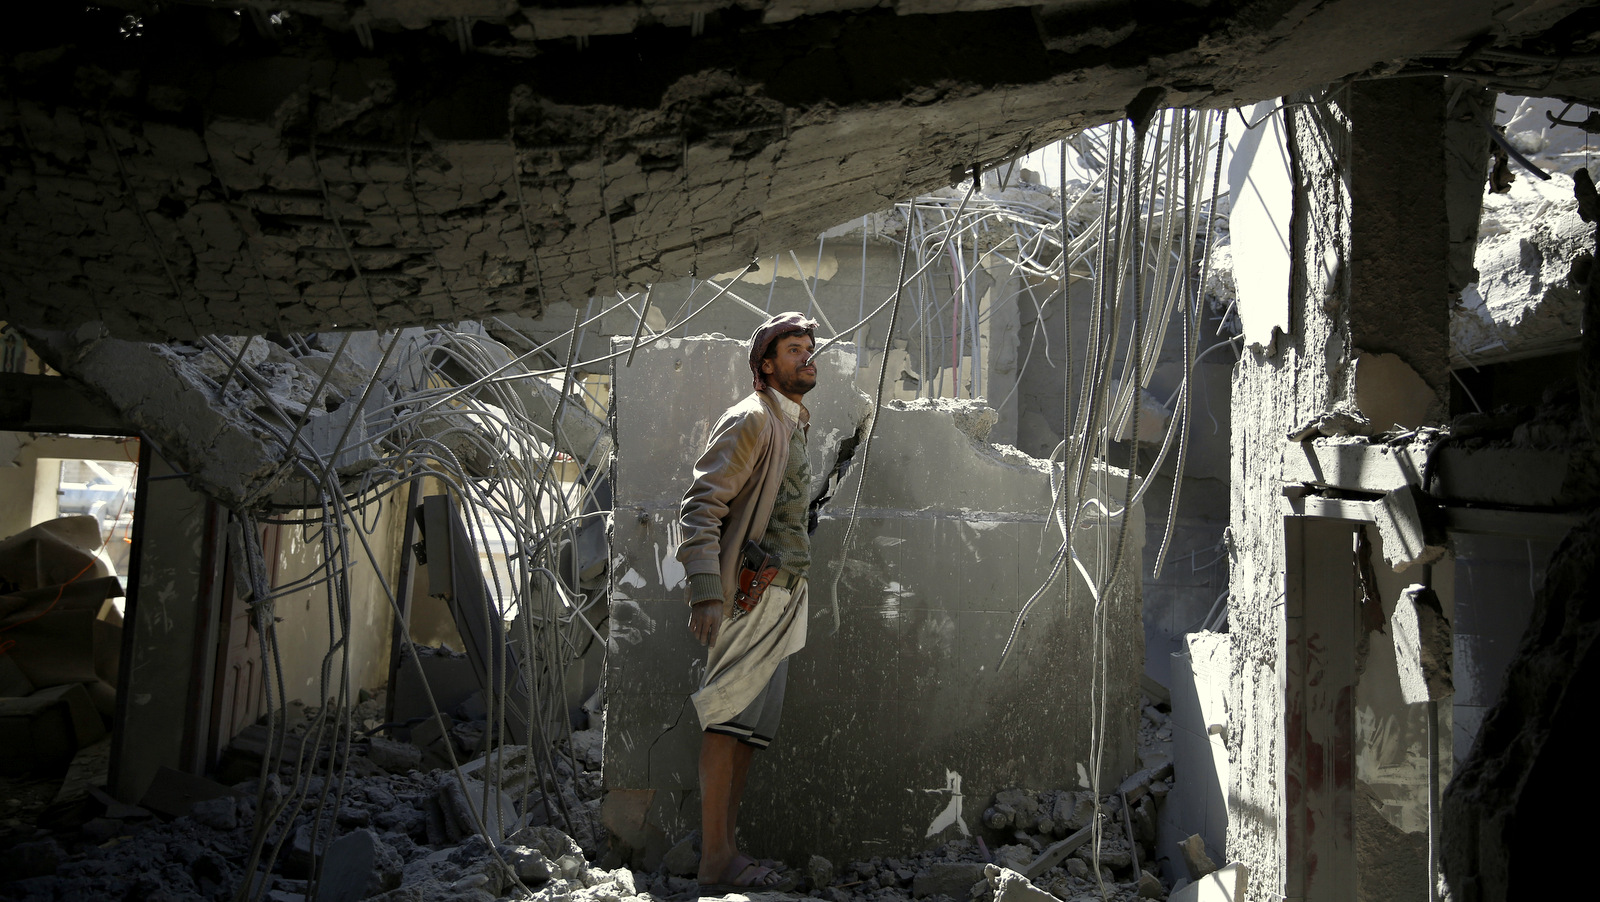 A man inspects his home destroyed by Saudi-led airstrikes in Sanaa, Yemen, Monday, Jan. 4, 2016. According to U.N. figures, the war in Yemen has killed at least 5,884 people since March, when fighting escalated after the Saudi-led coalition began launching airstrikes claiming to be targeting the Houthi rebels. (AP Photo/Hani Mohammed)